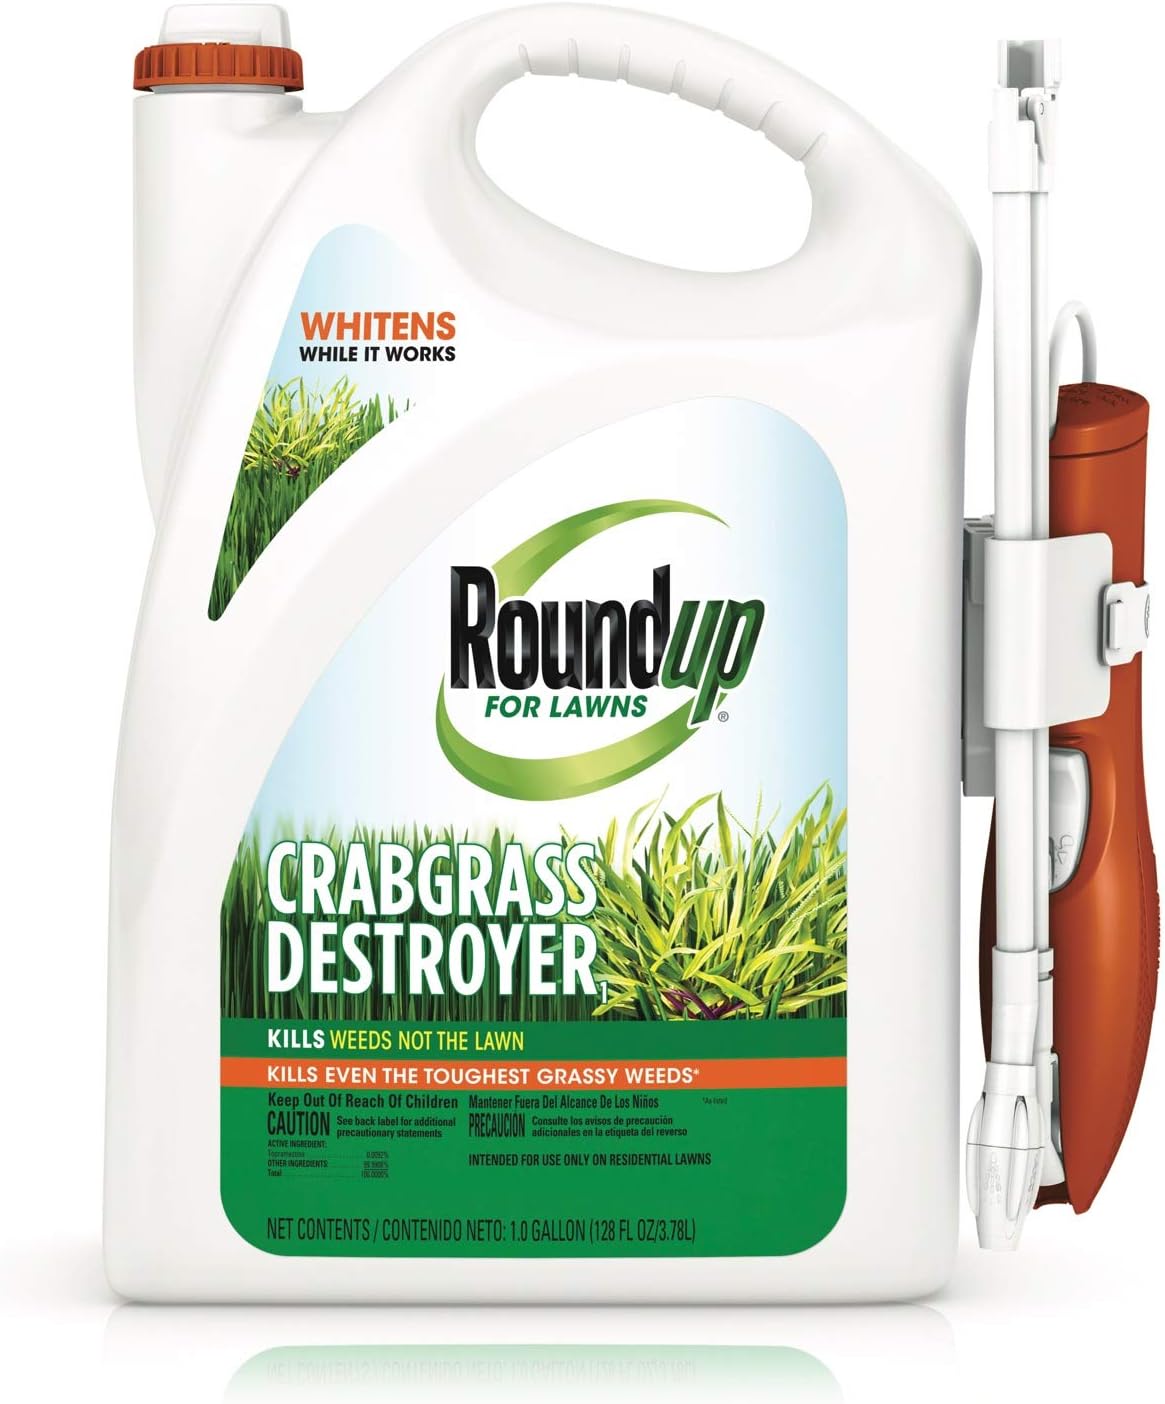 Roundup for Lawns Crabgrass Destroyer1 - Tough Weed [...]